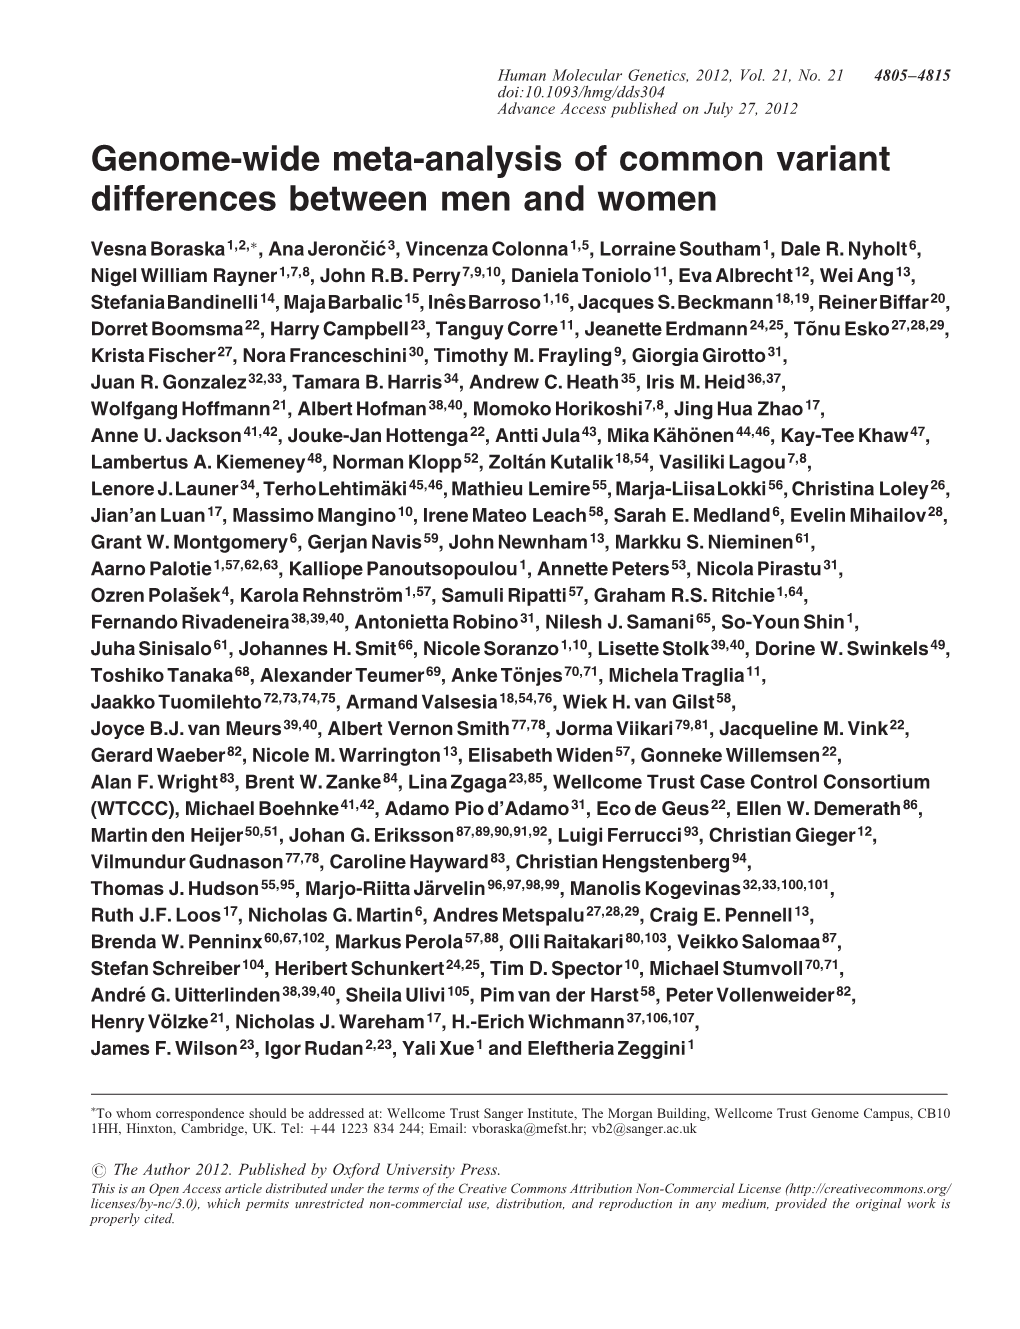 Genome-Wide Meta-Analysis of Common Variant Differences Between Men and Women